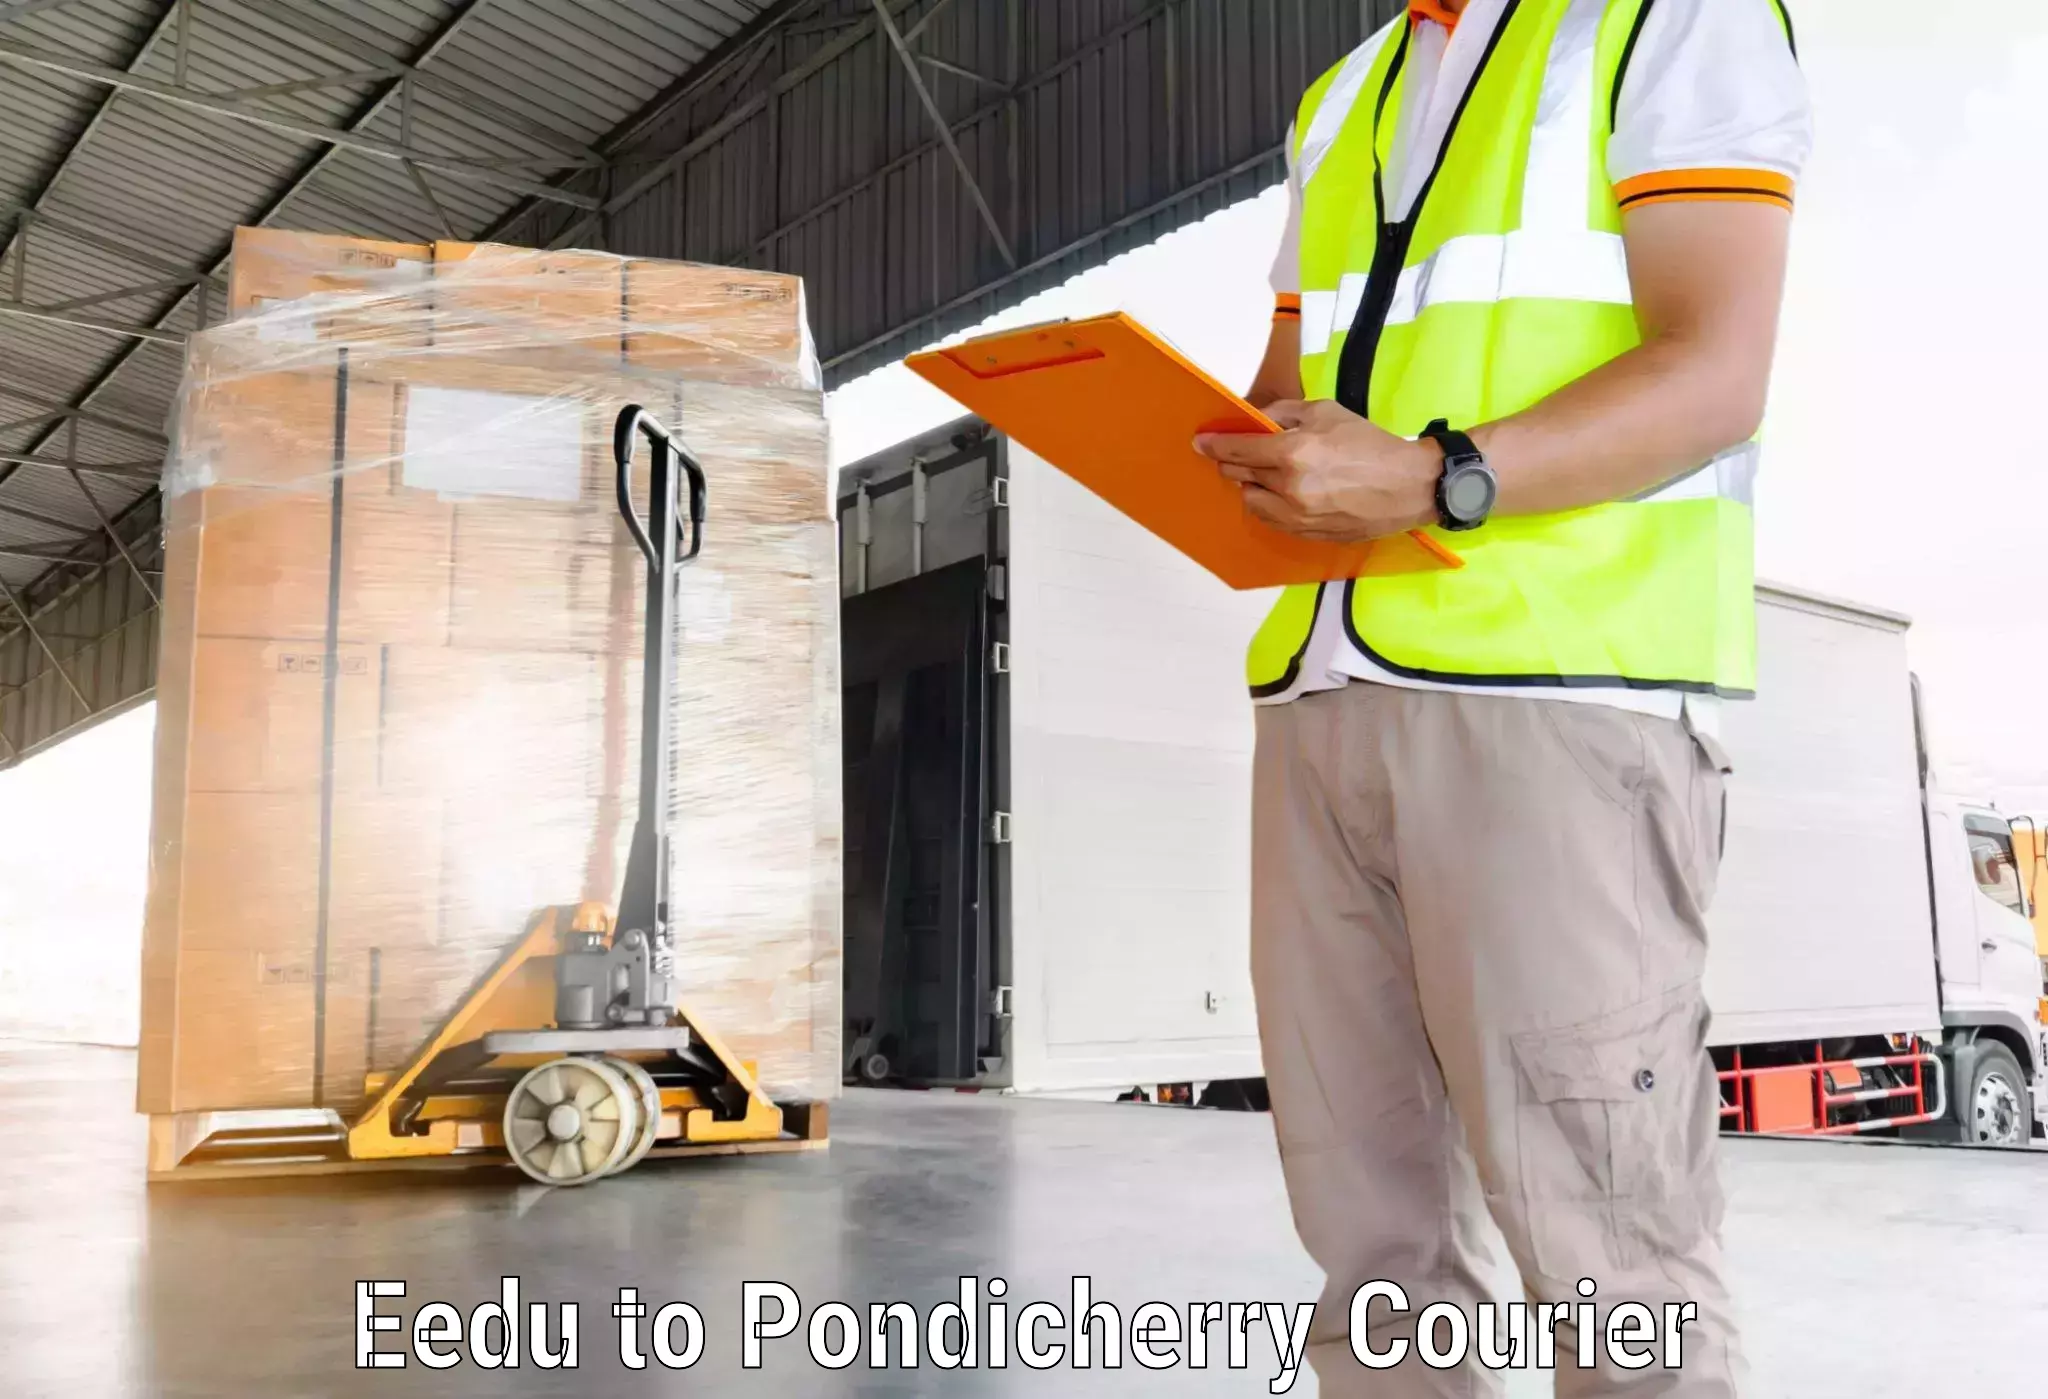 Subscription-based courier in Eedu to Pondicherry